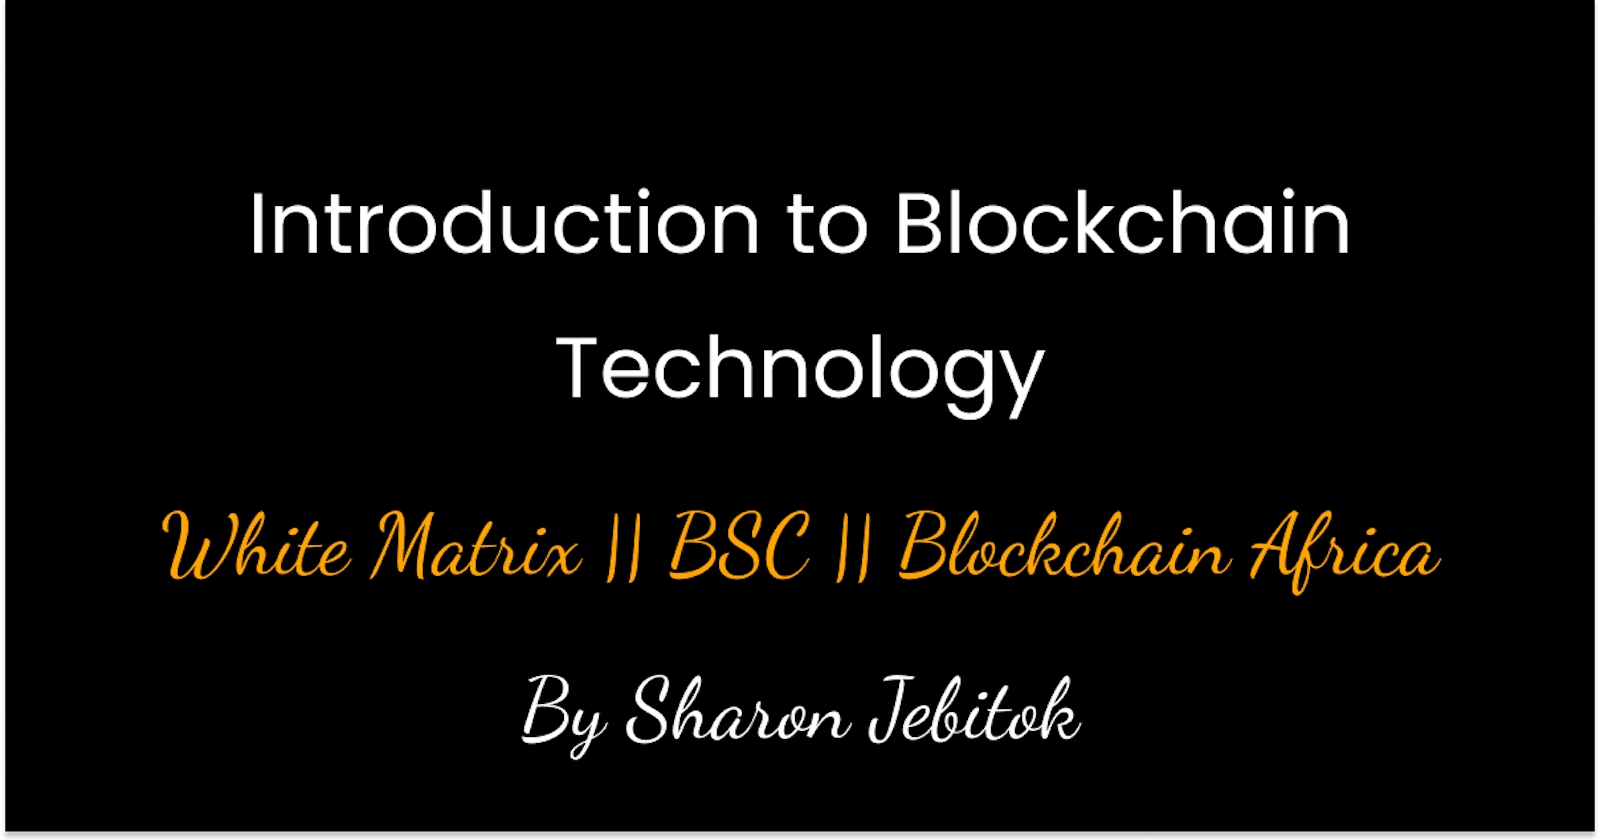 Introduction to Blockchain Technology